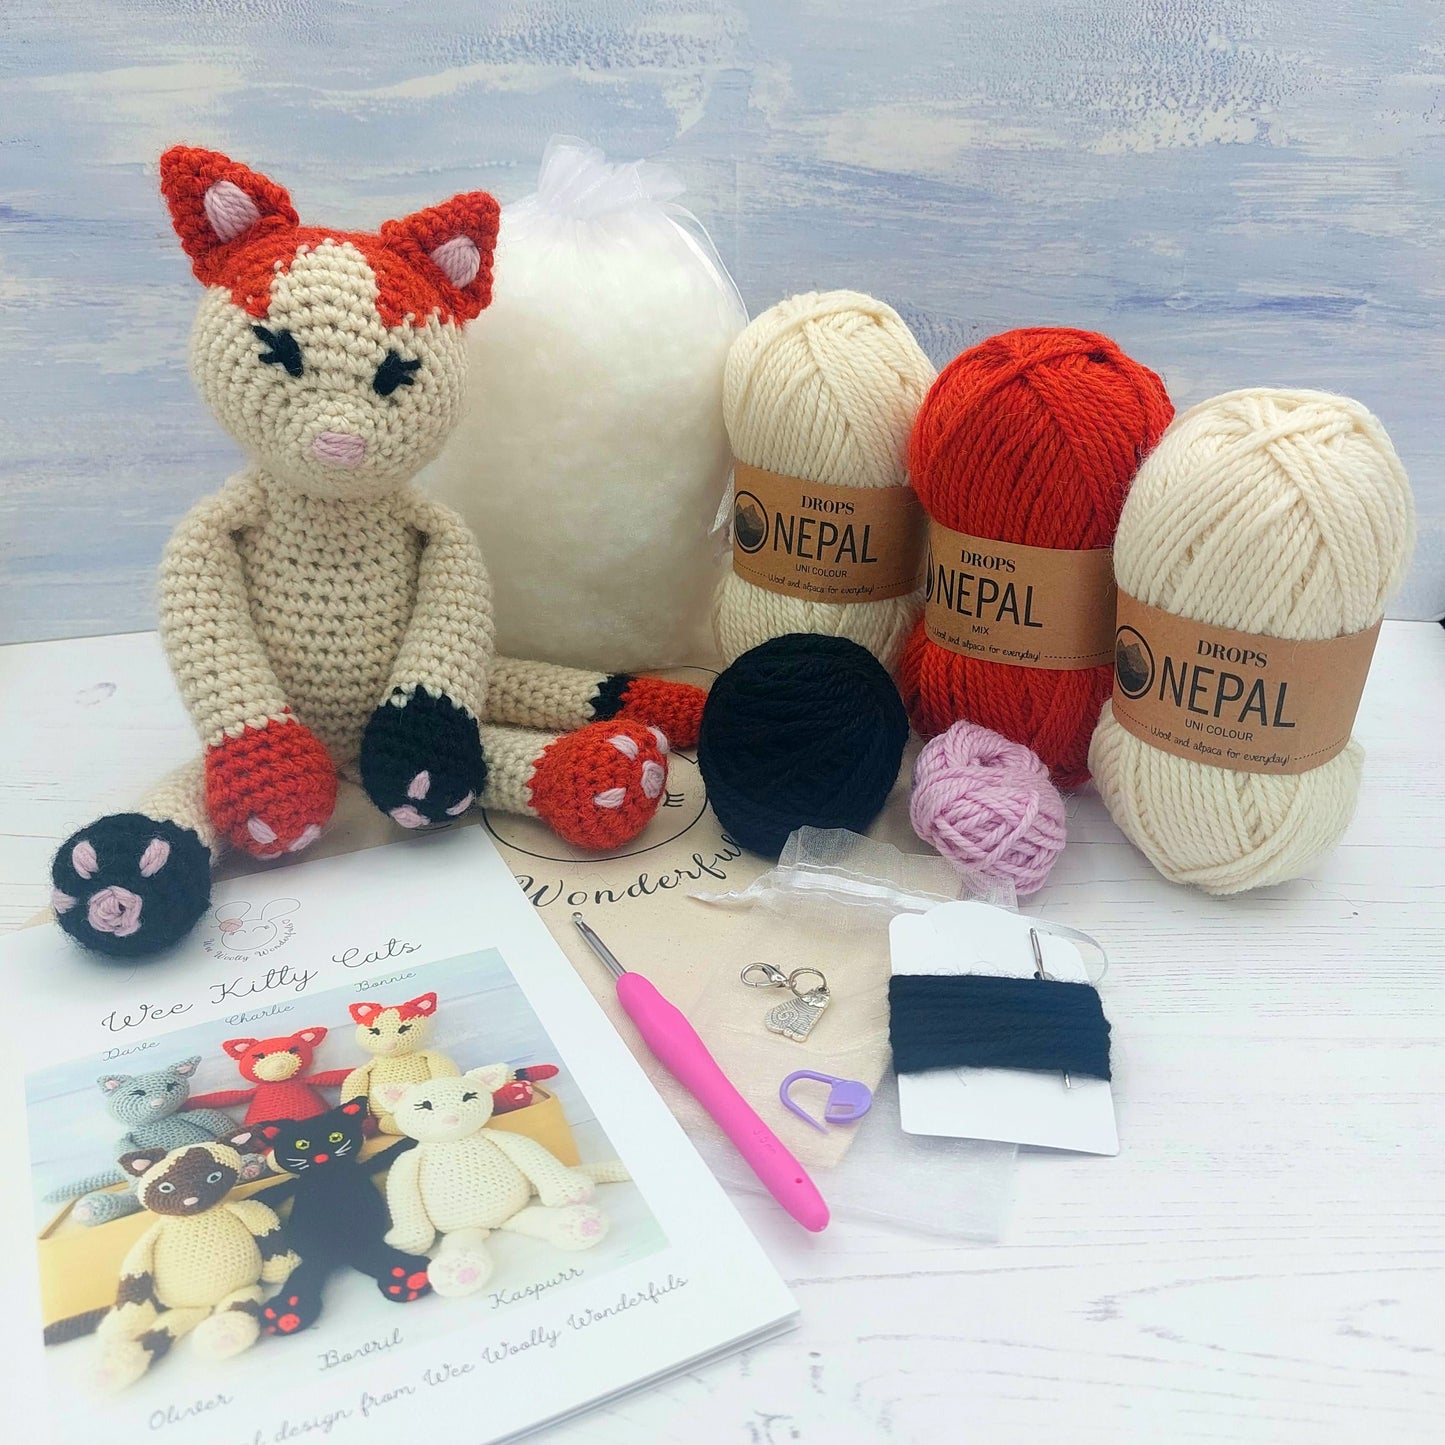 Cat Crochet Kit Contents - Wool, Pattern, Stuffing and Hook